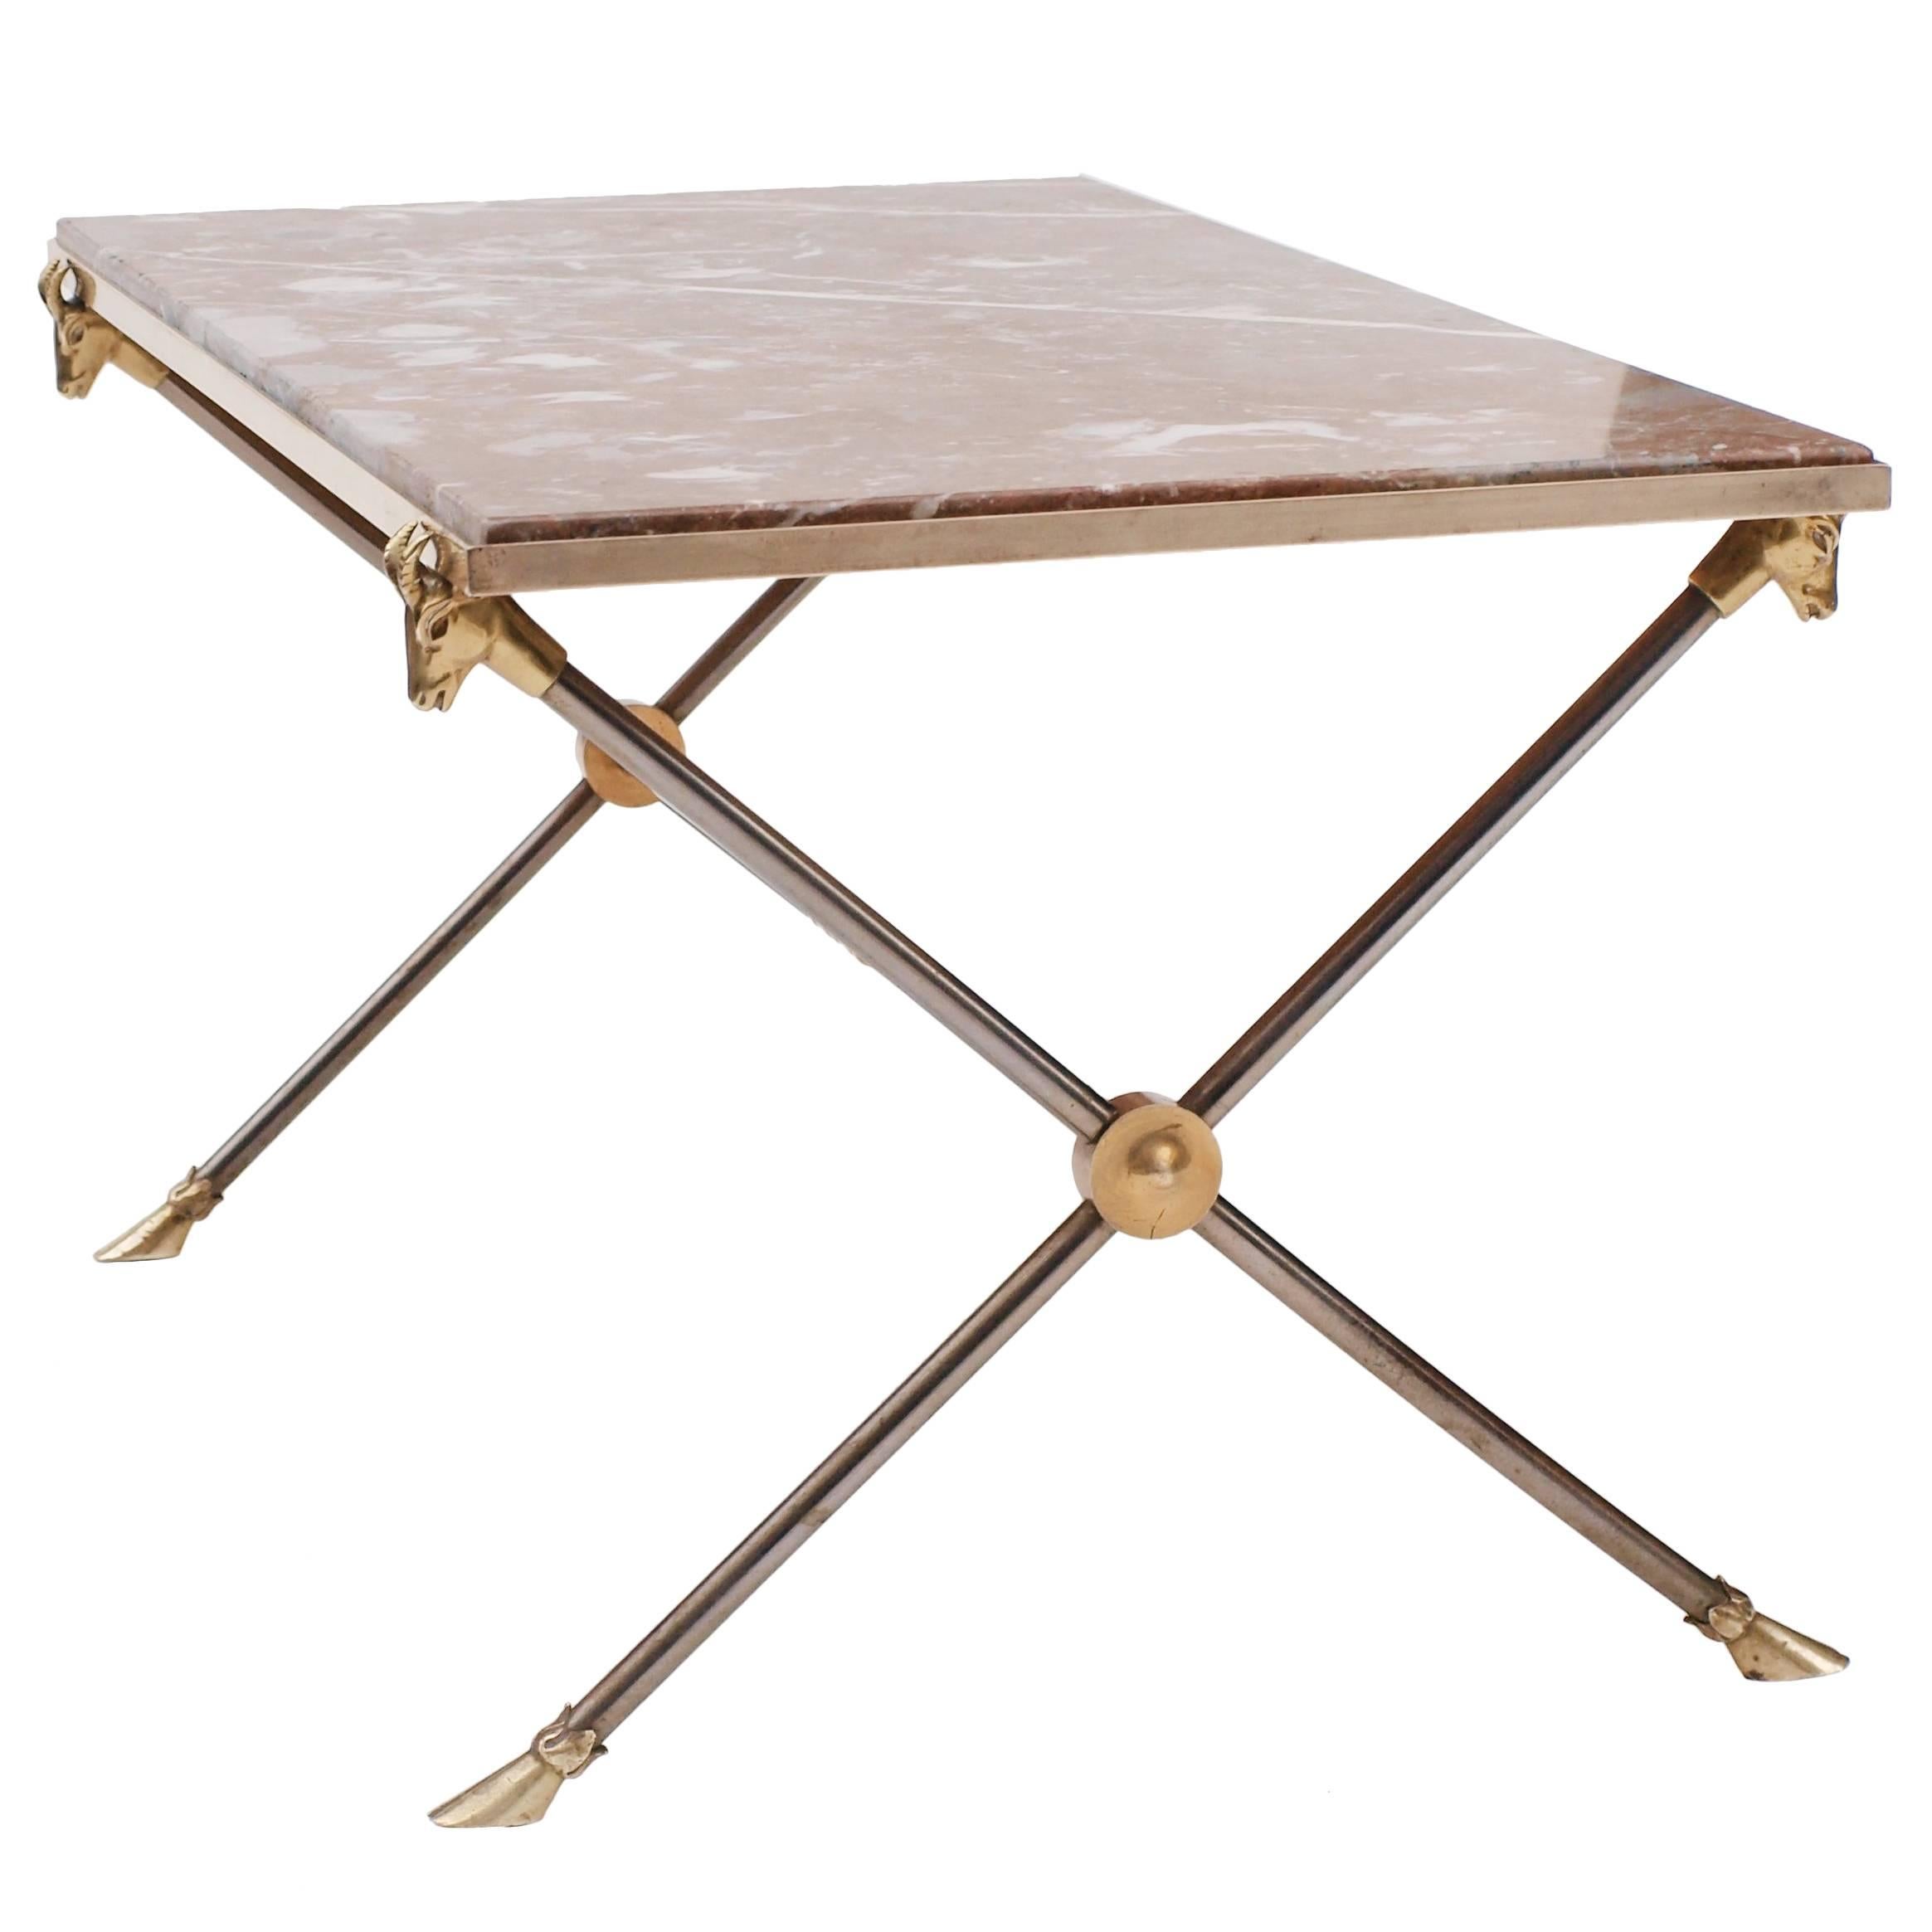 A Maison Ramsay coffee table in brass and nickel, ram's head details supporting the richly colored marble top and hoof shaped feet.
  